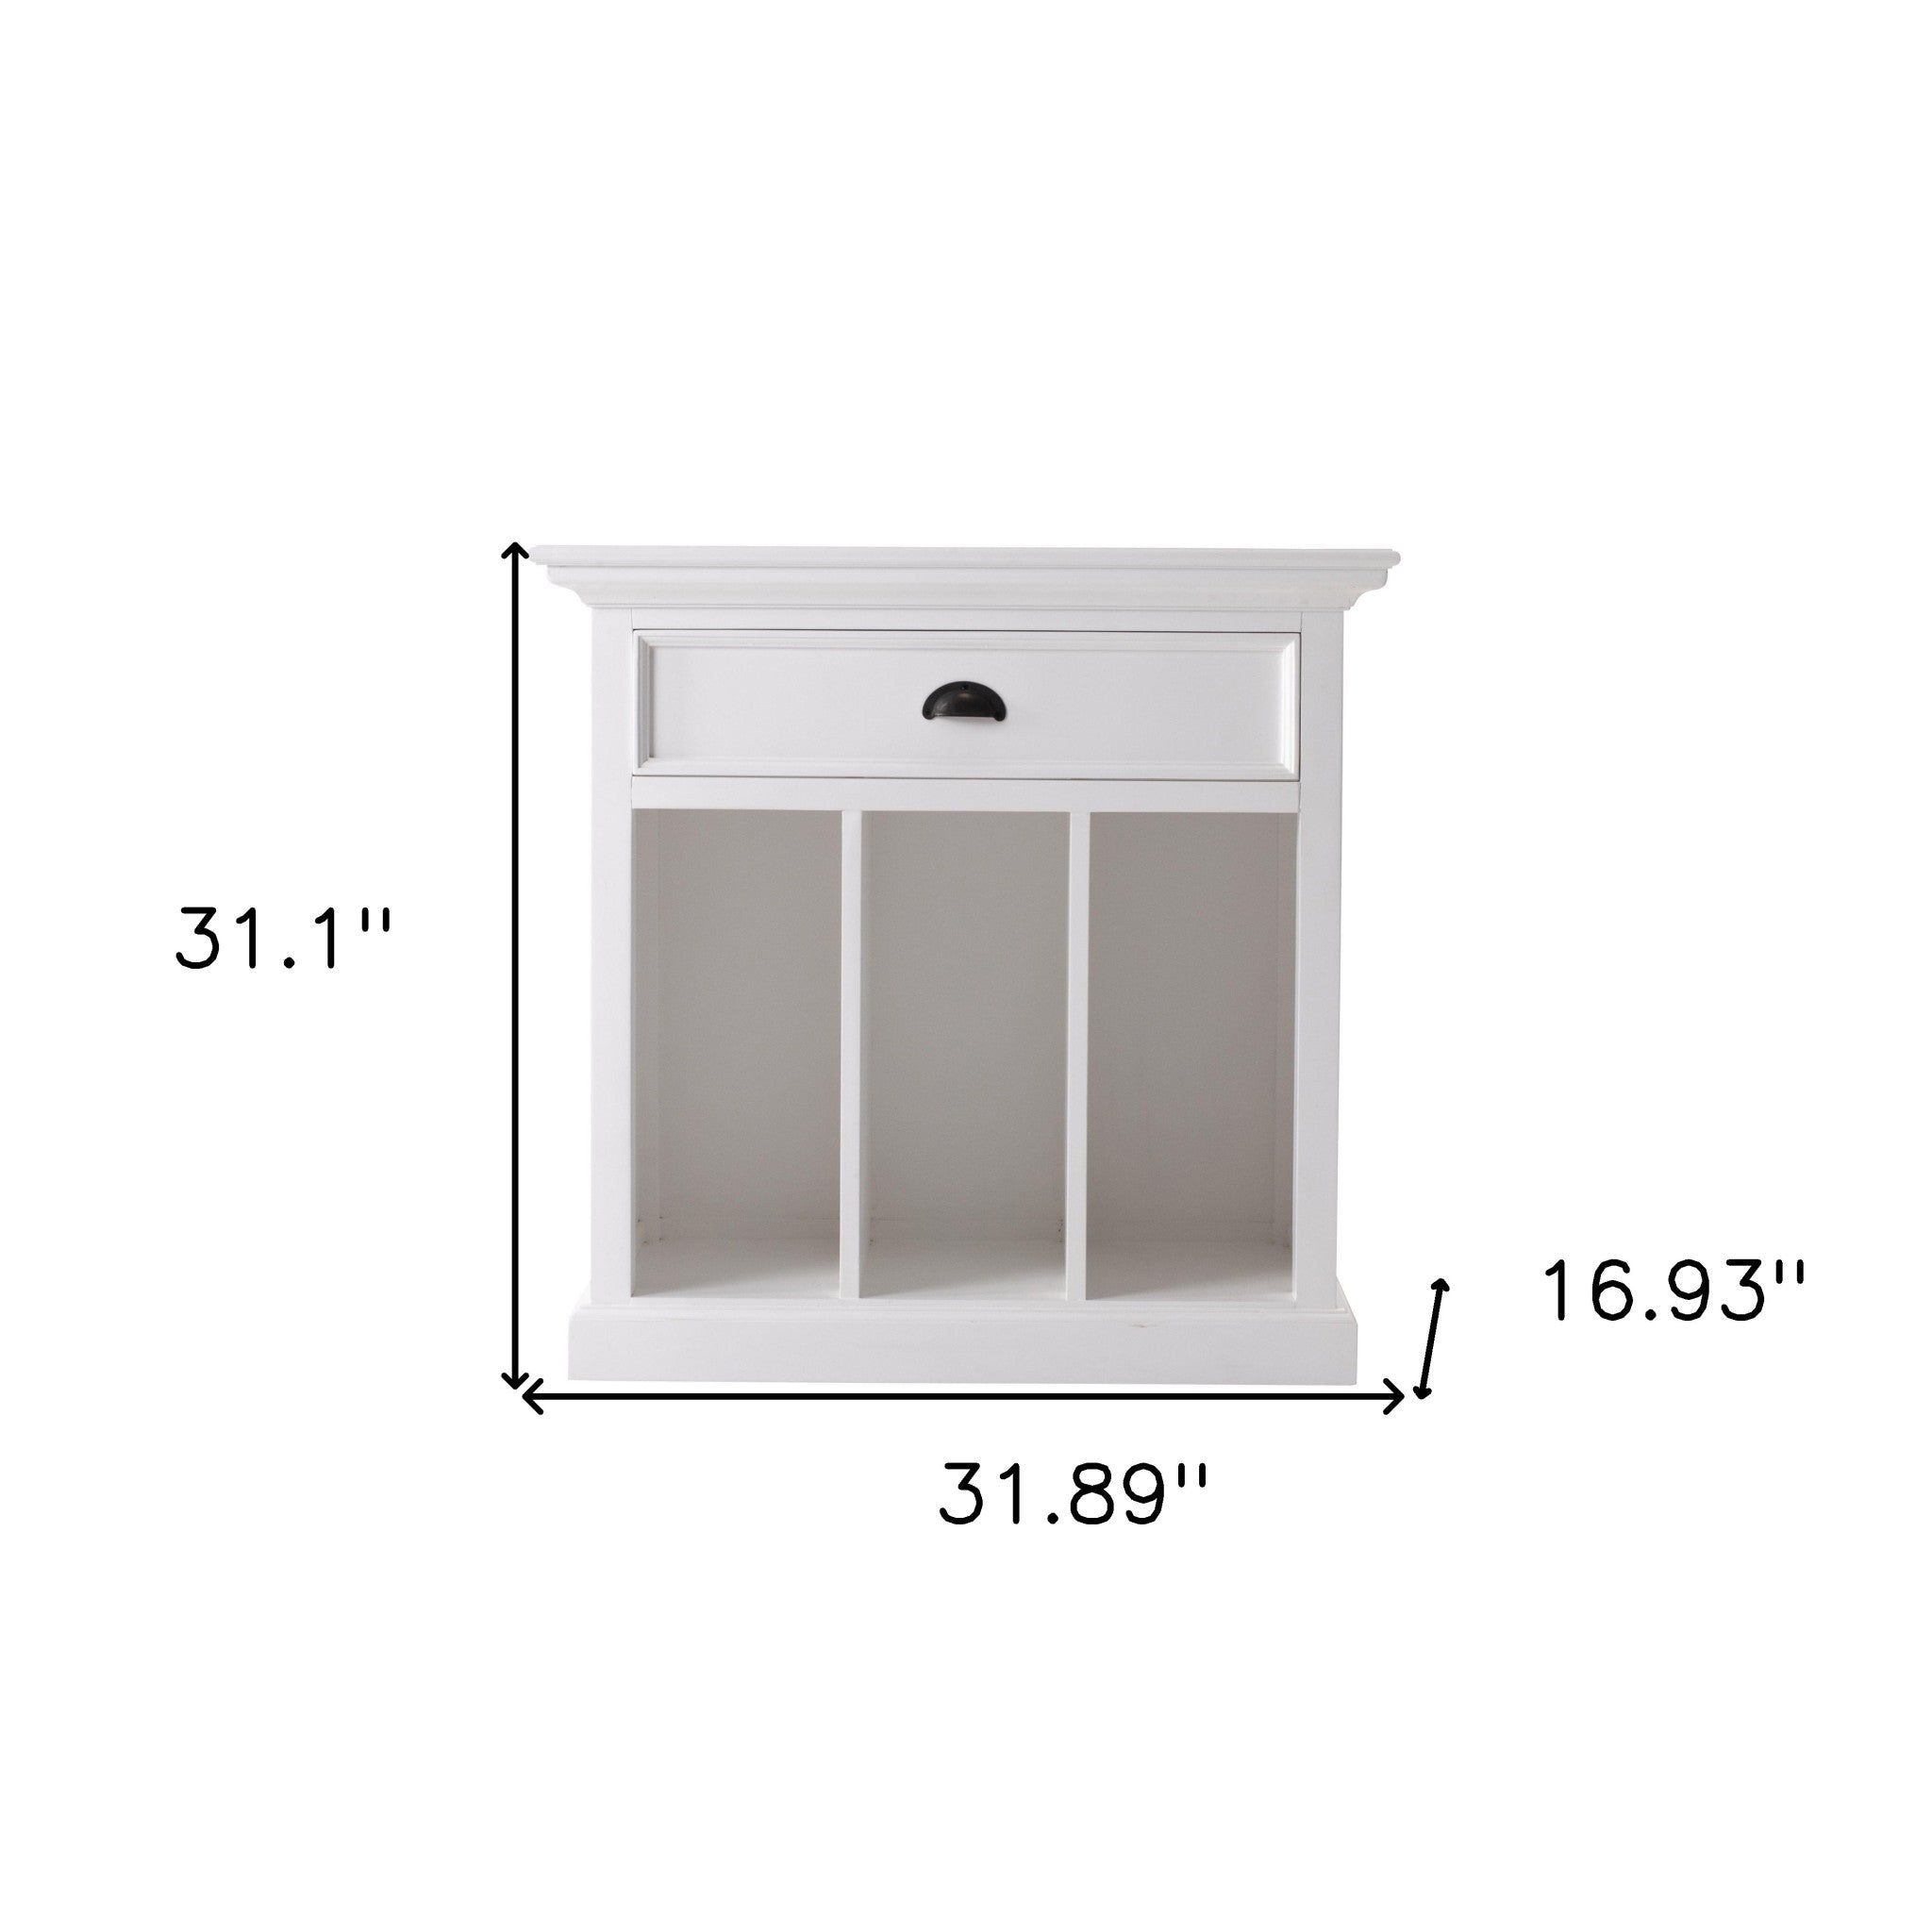 31" Distressed White Wood Nightstand with Dividers